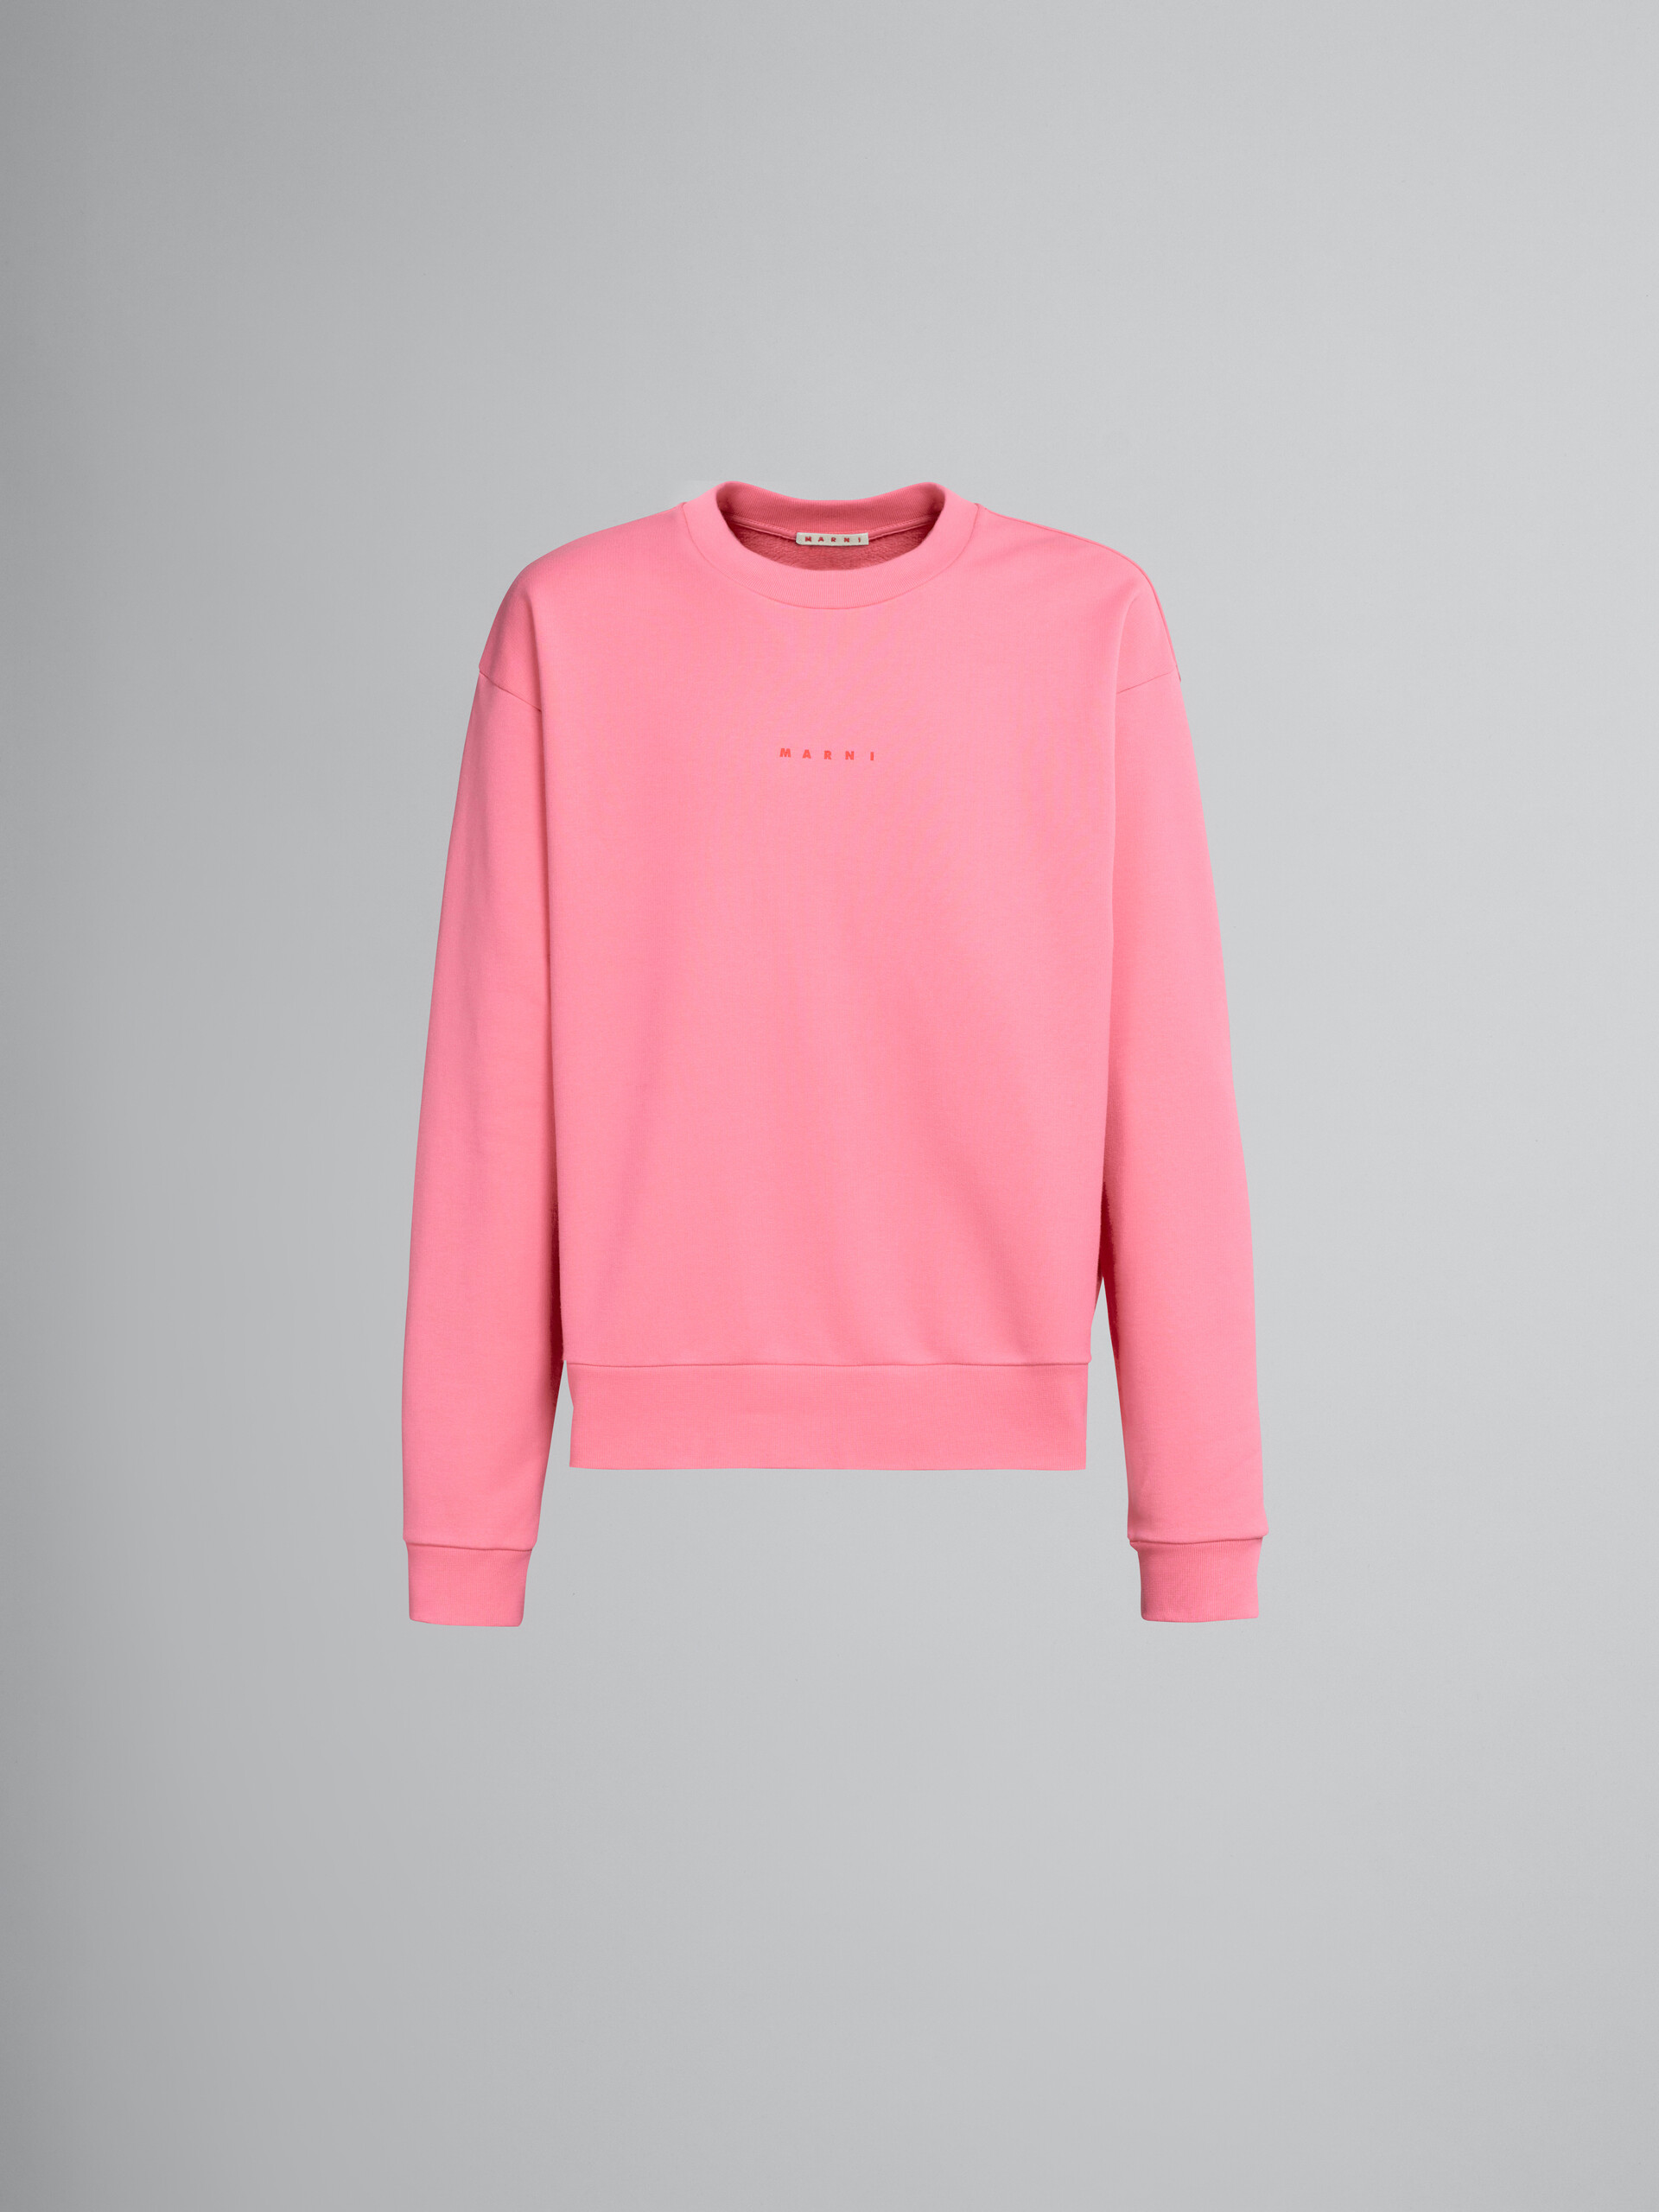 Candy pink sweatshirt with logo - Sweaters - Image 1